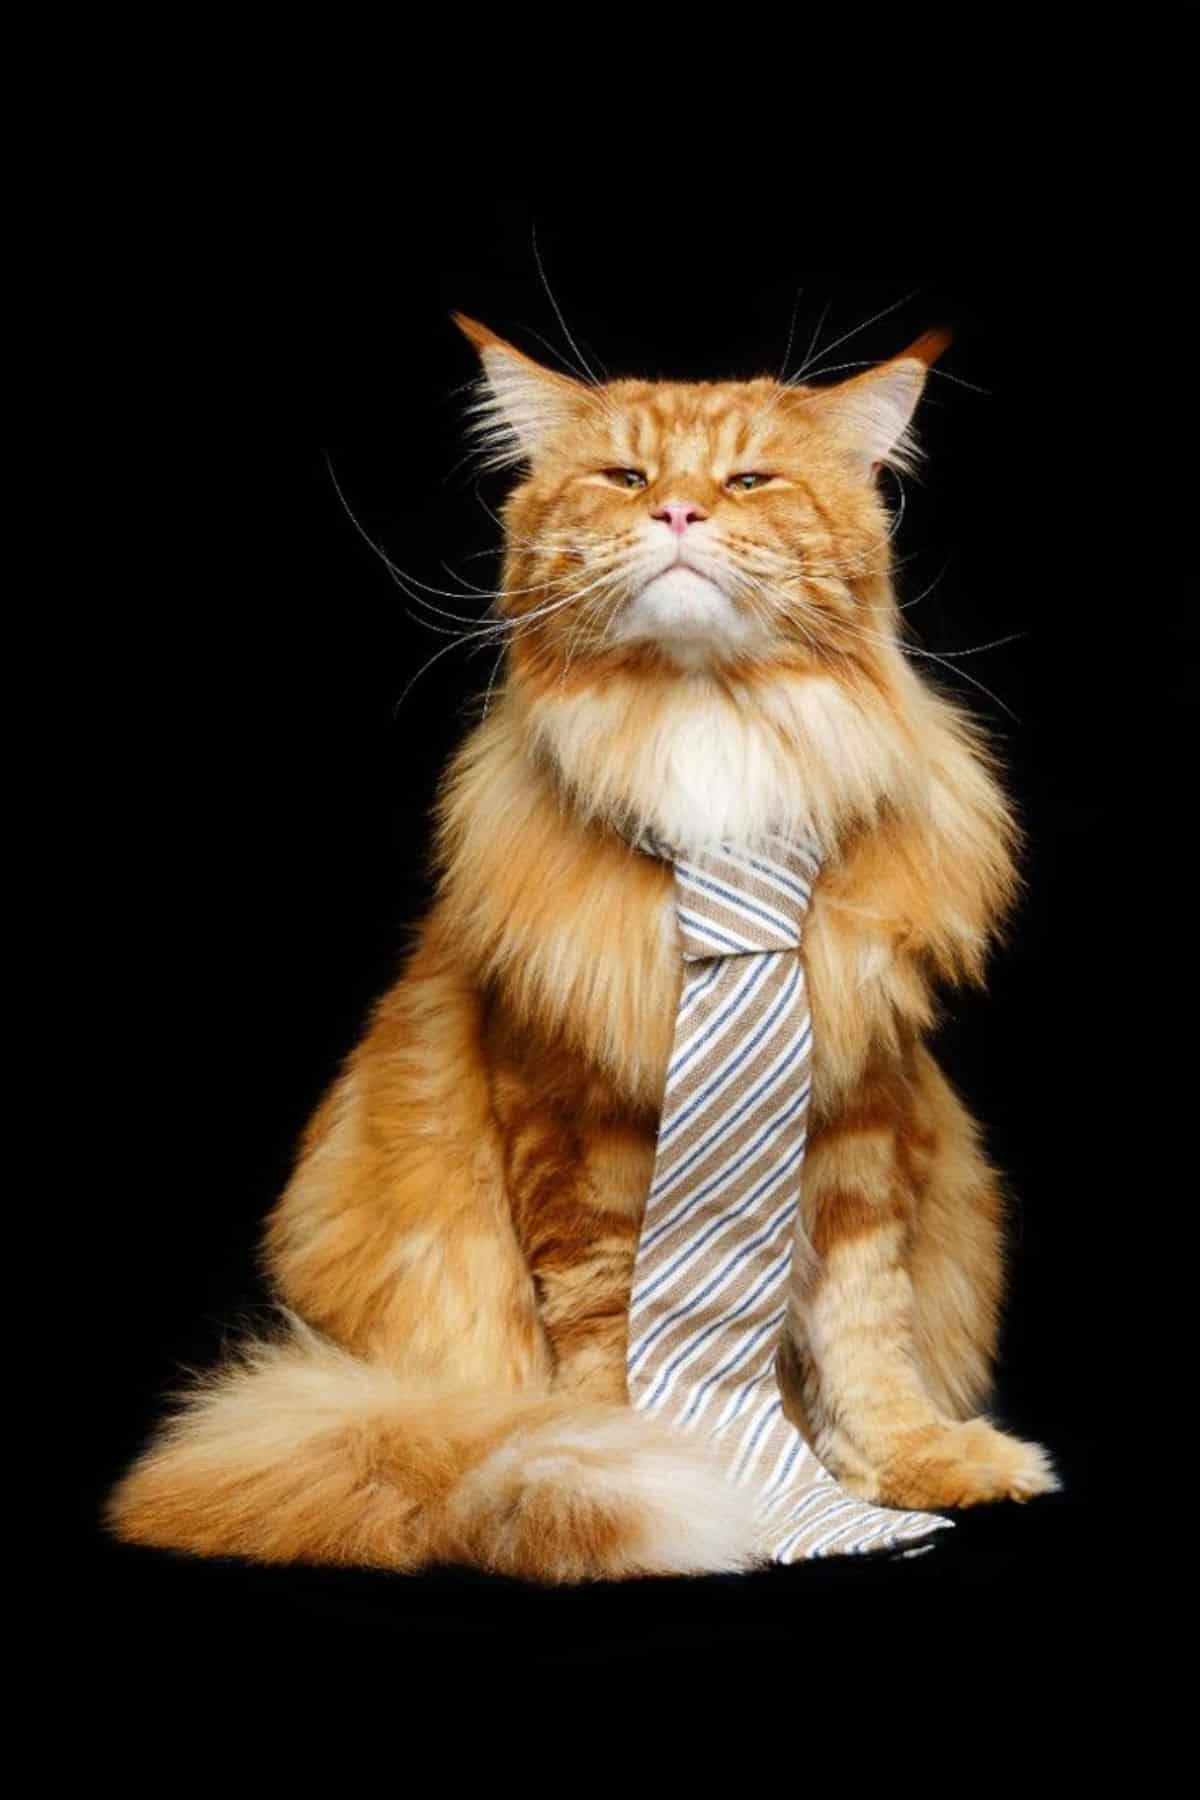 A fluffy ginger maine coon with a tie on a black background.